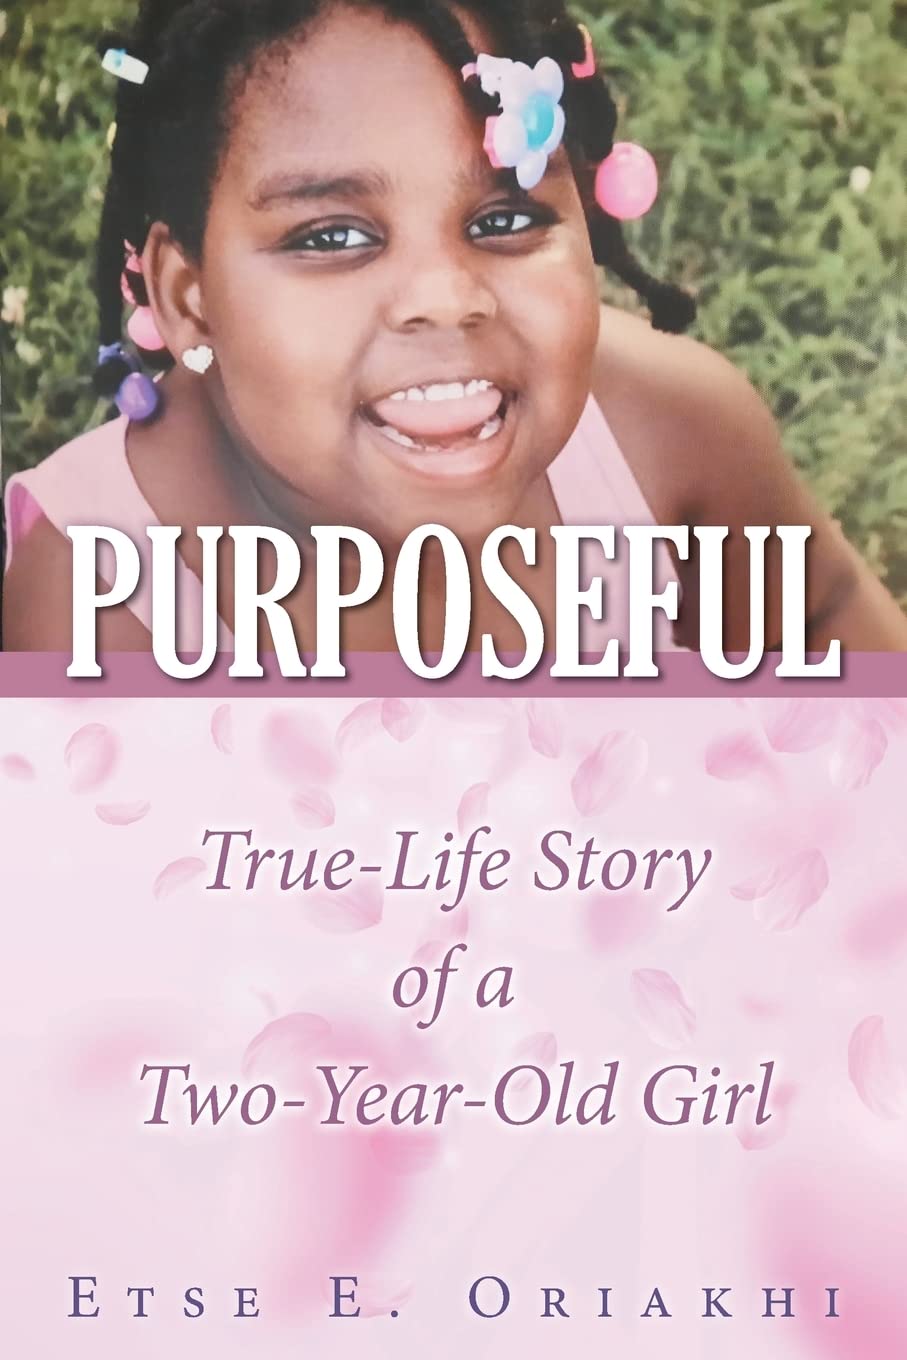 Purposeful: True-Life Story of a Two-Year-Old Girl, An Inspirational Memoir